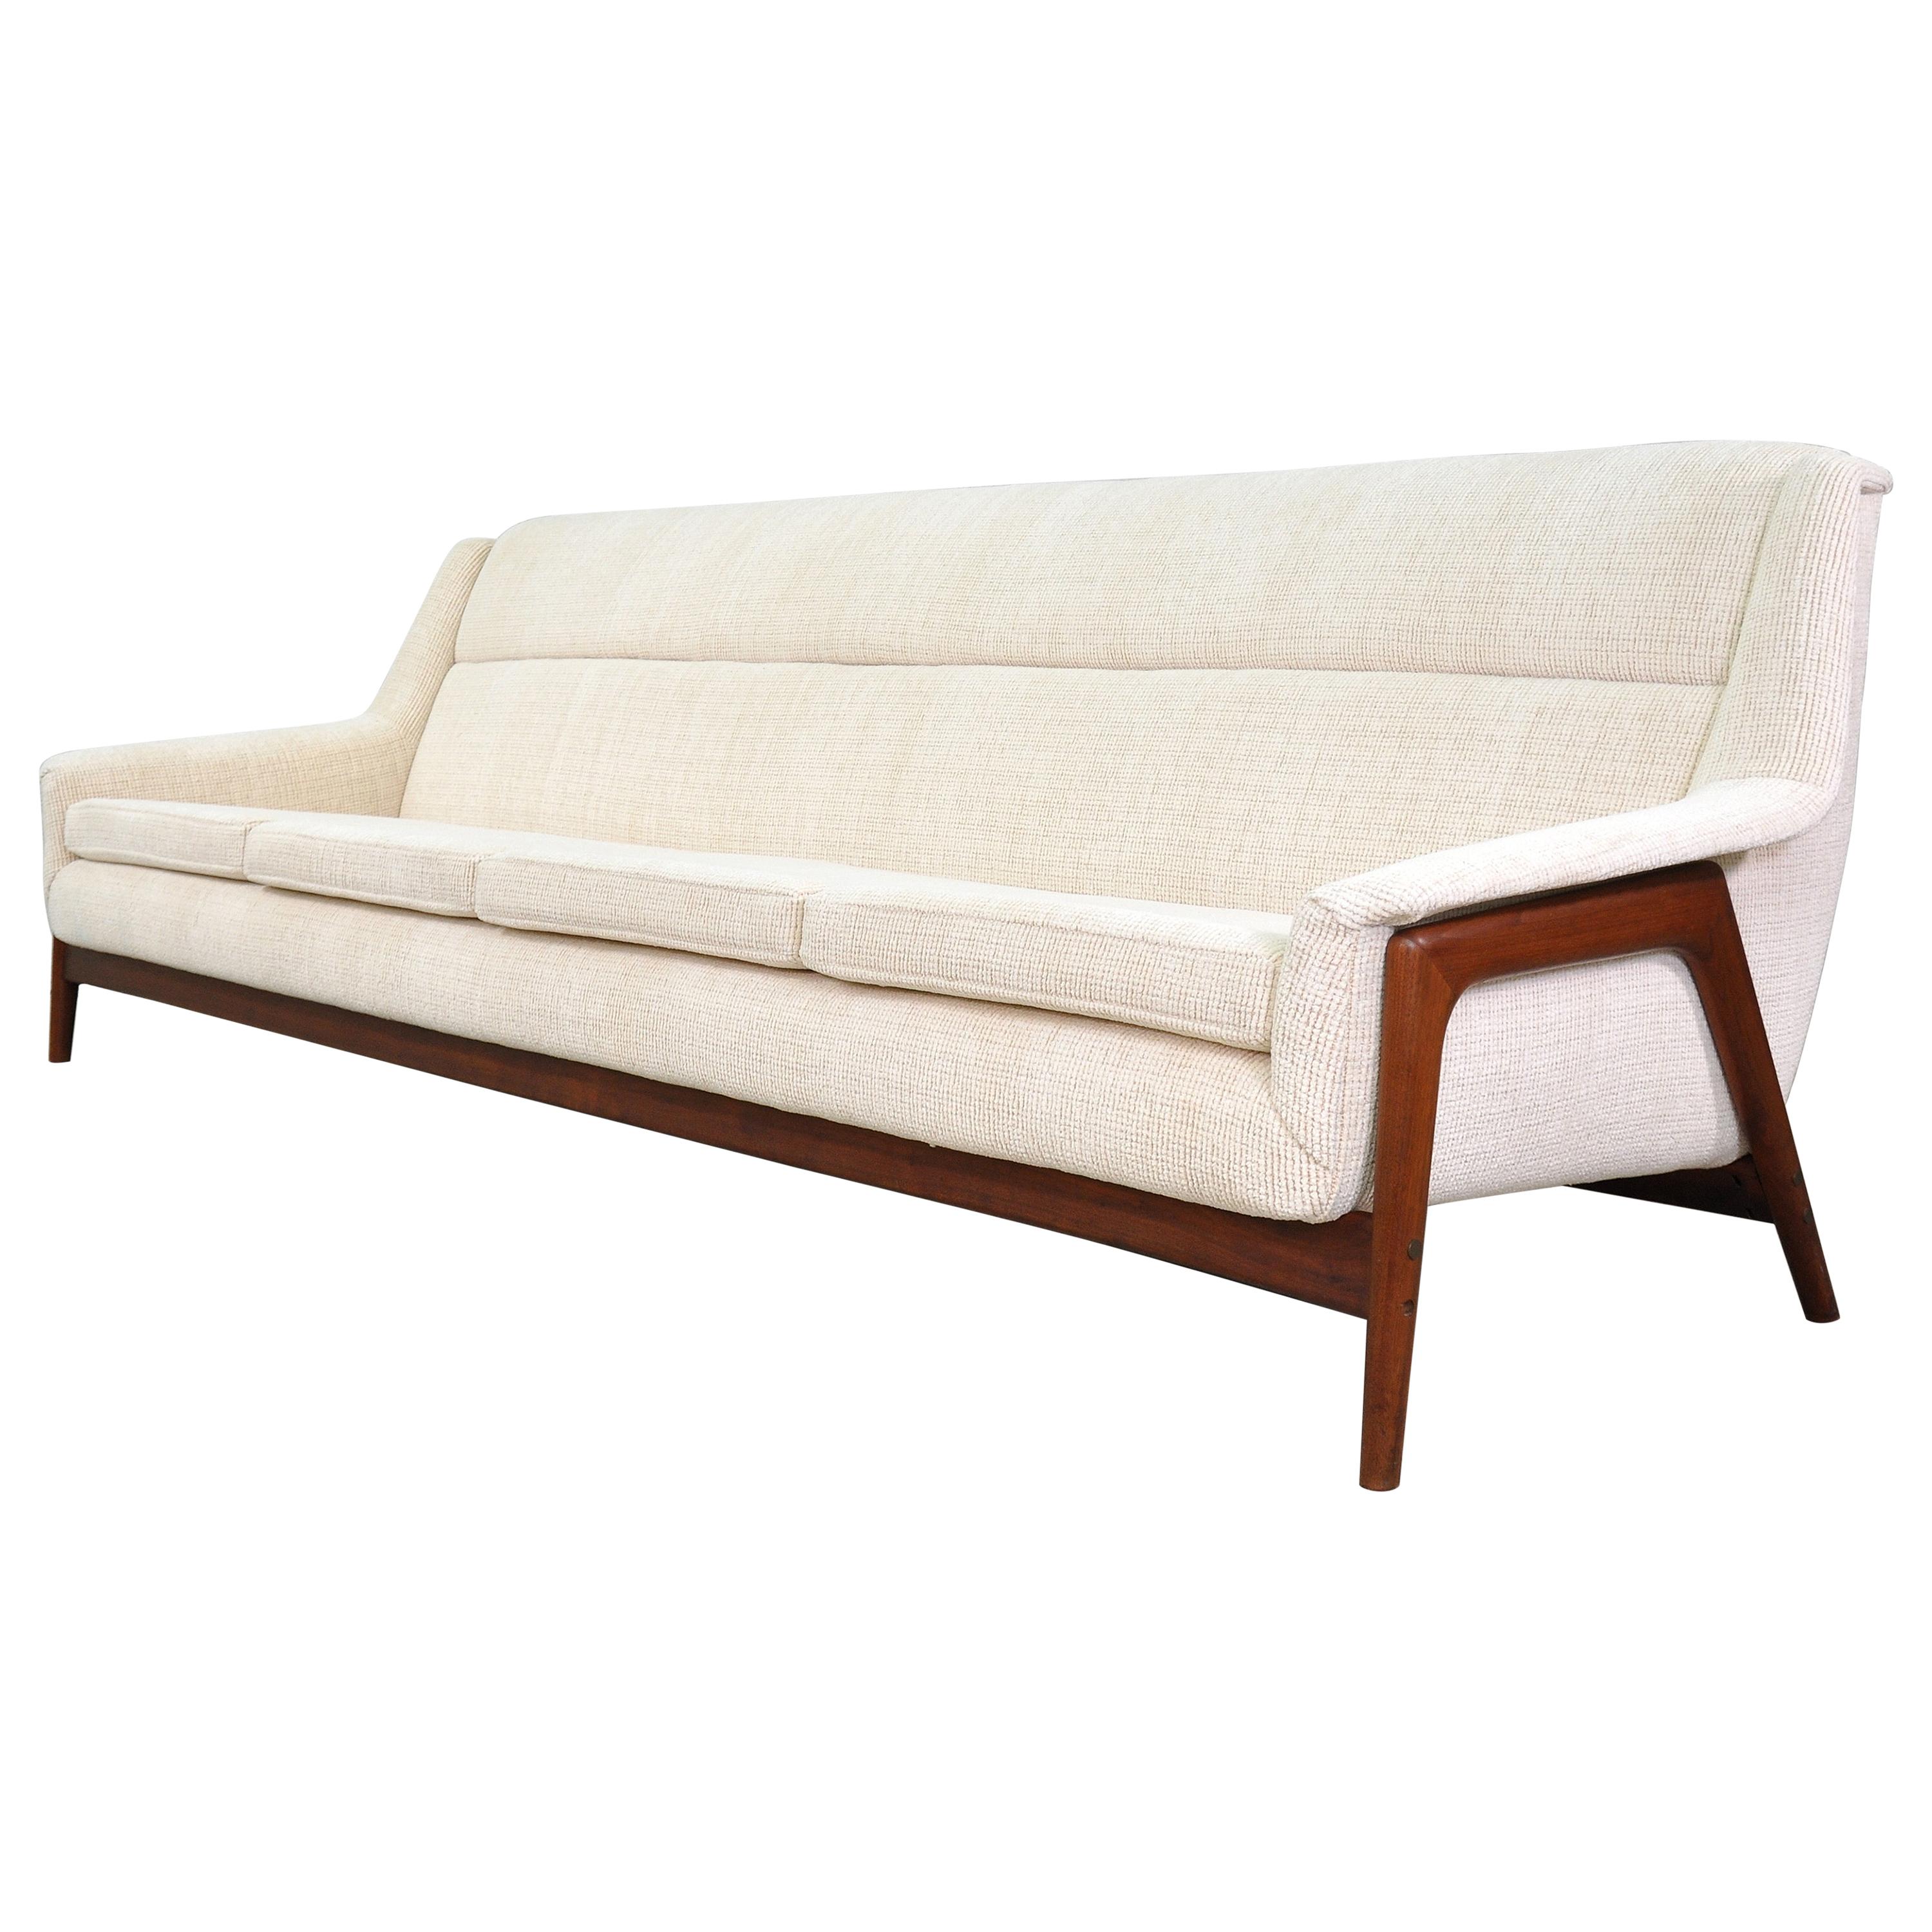 Beautiful and rarely found midcentury Scandinavian Modern four-seat couch designed in the 1960s by Folke Ohlsson for DUX. The Profil sofa feature an exposed sculptural solid teak frame. The piece has been fully reupholstered in a soft, neutral